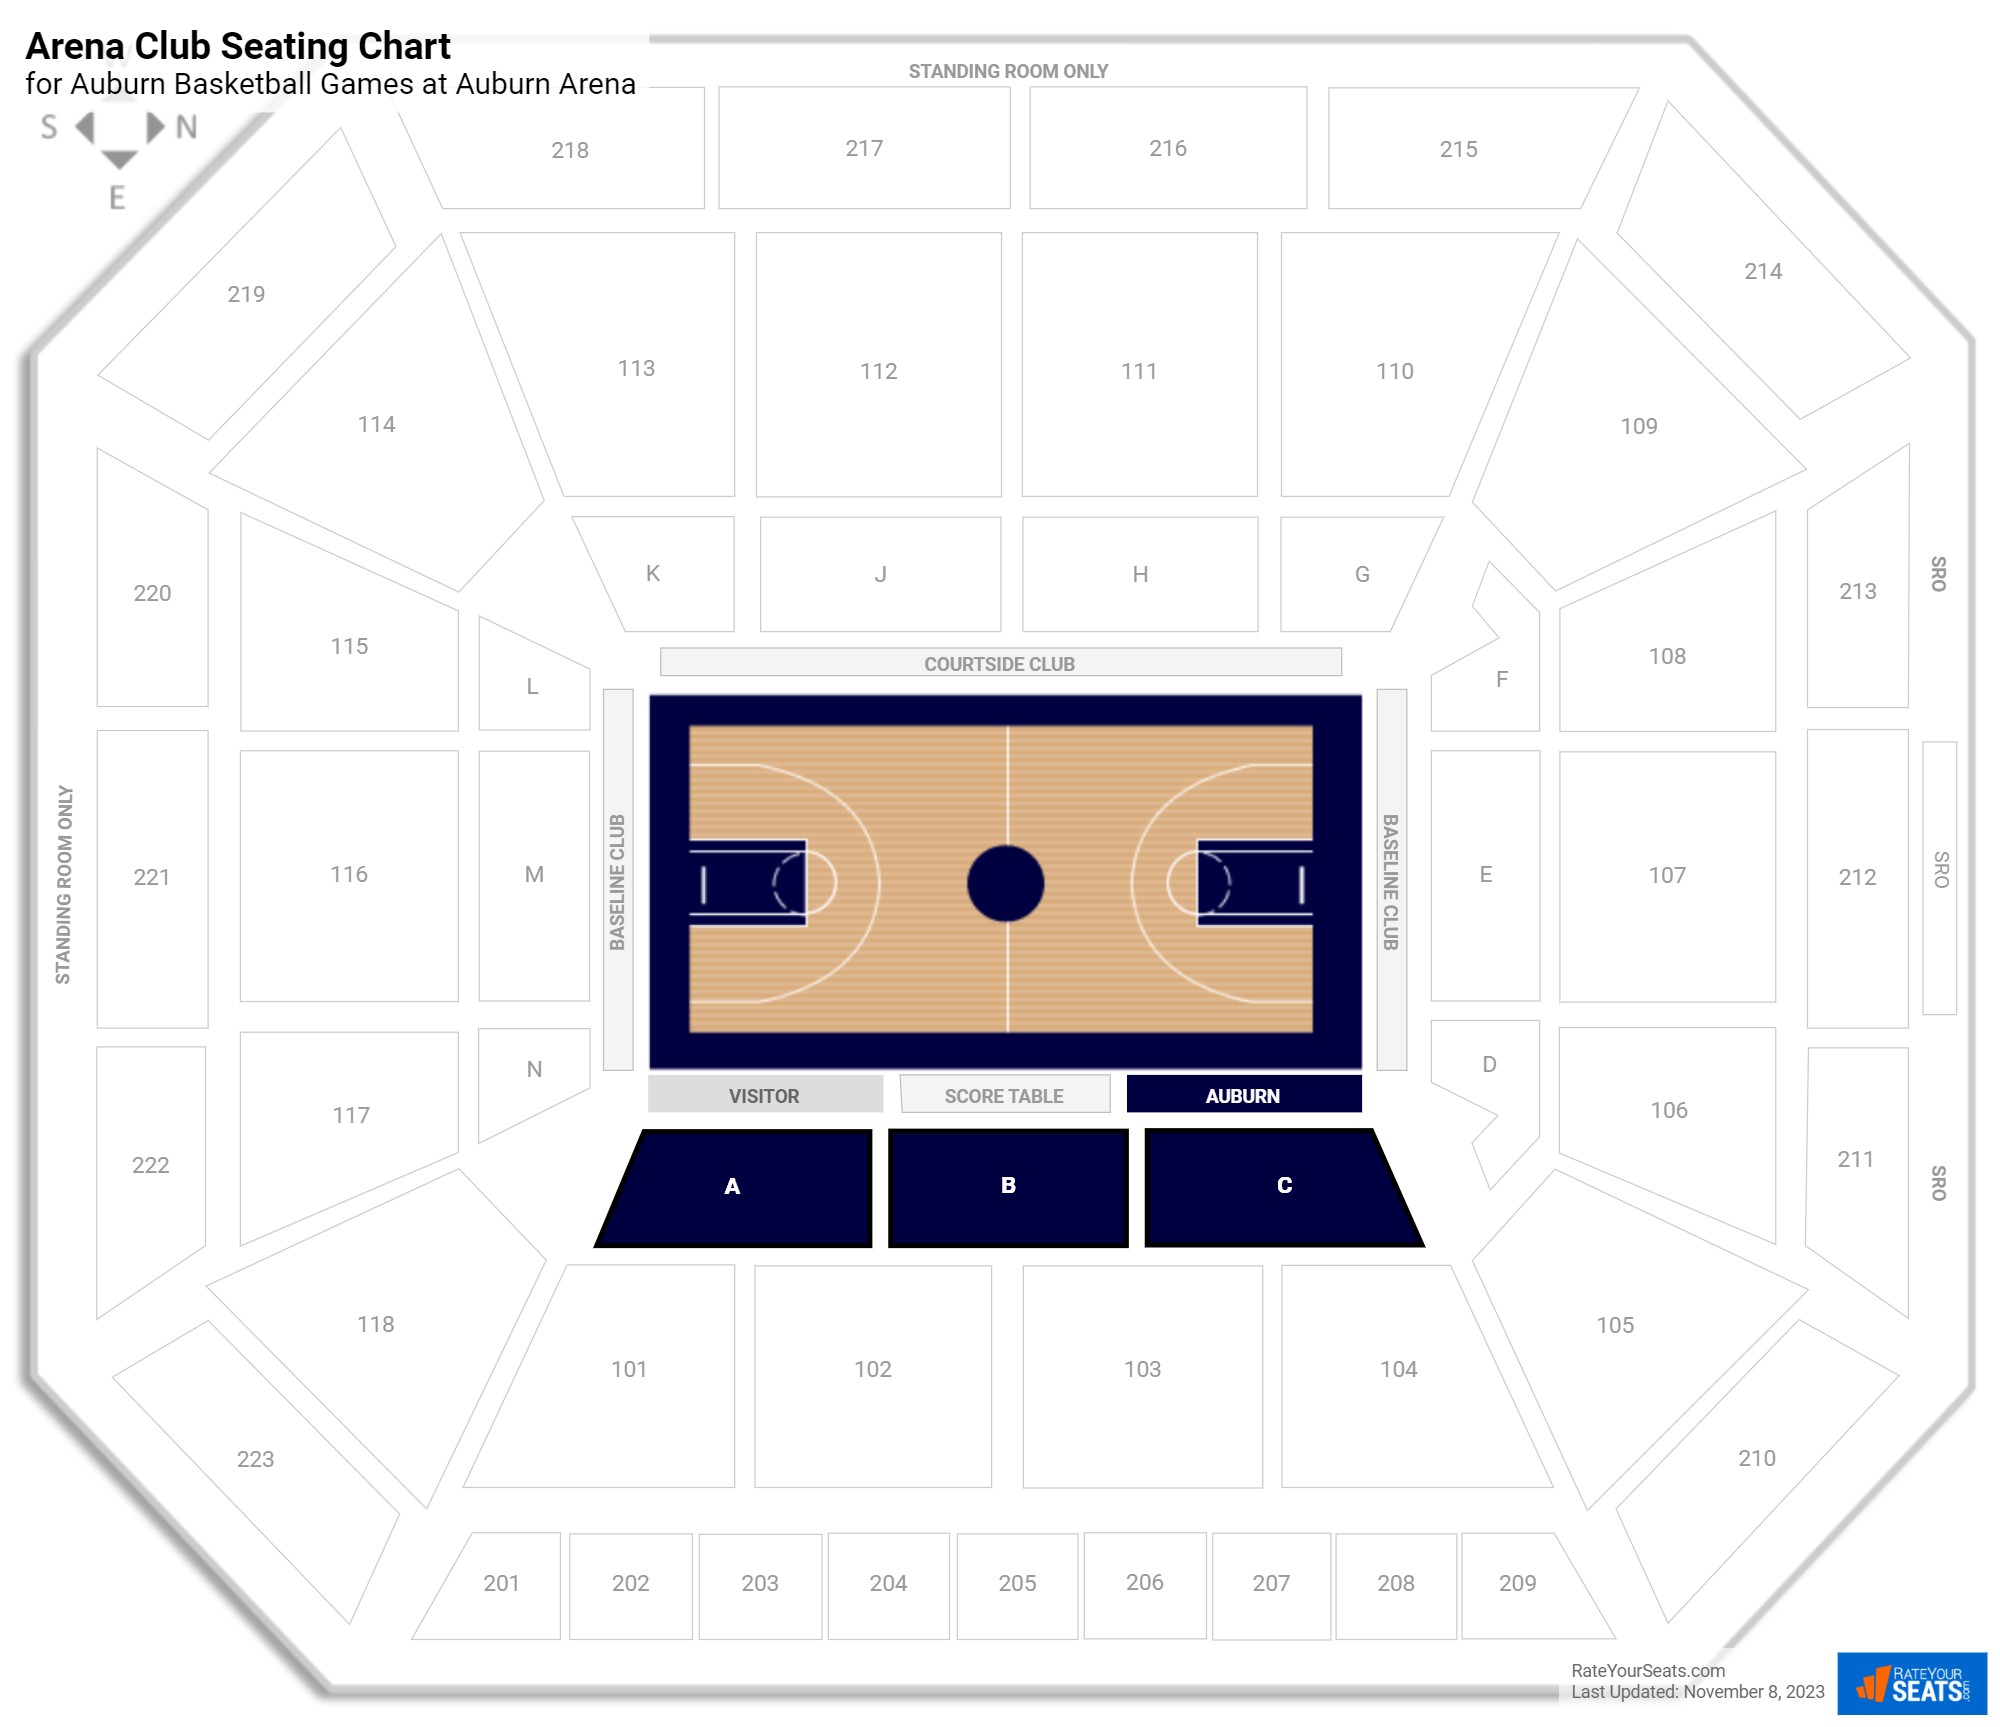 The PALACE of AUBURN HILLS Arena Seating Chart Diagram Poster -  Israel